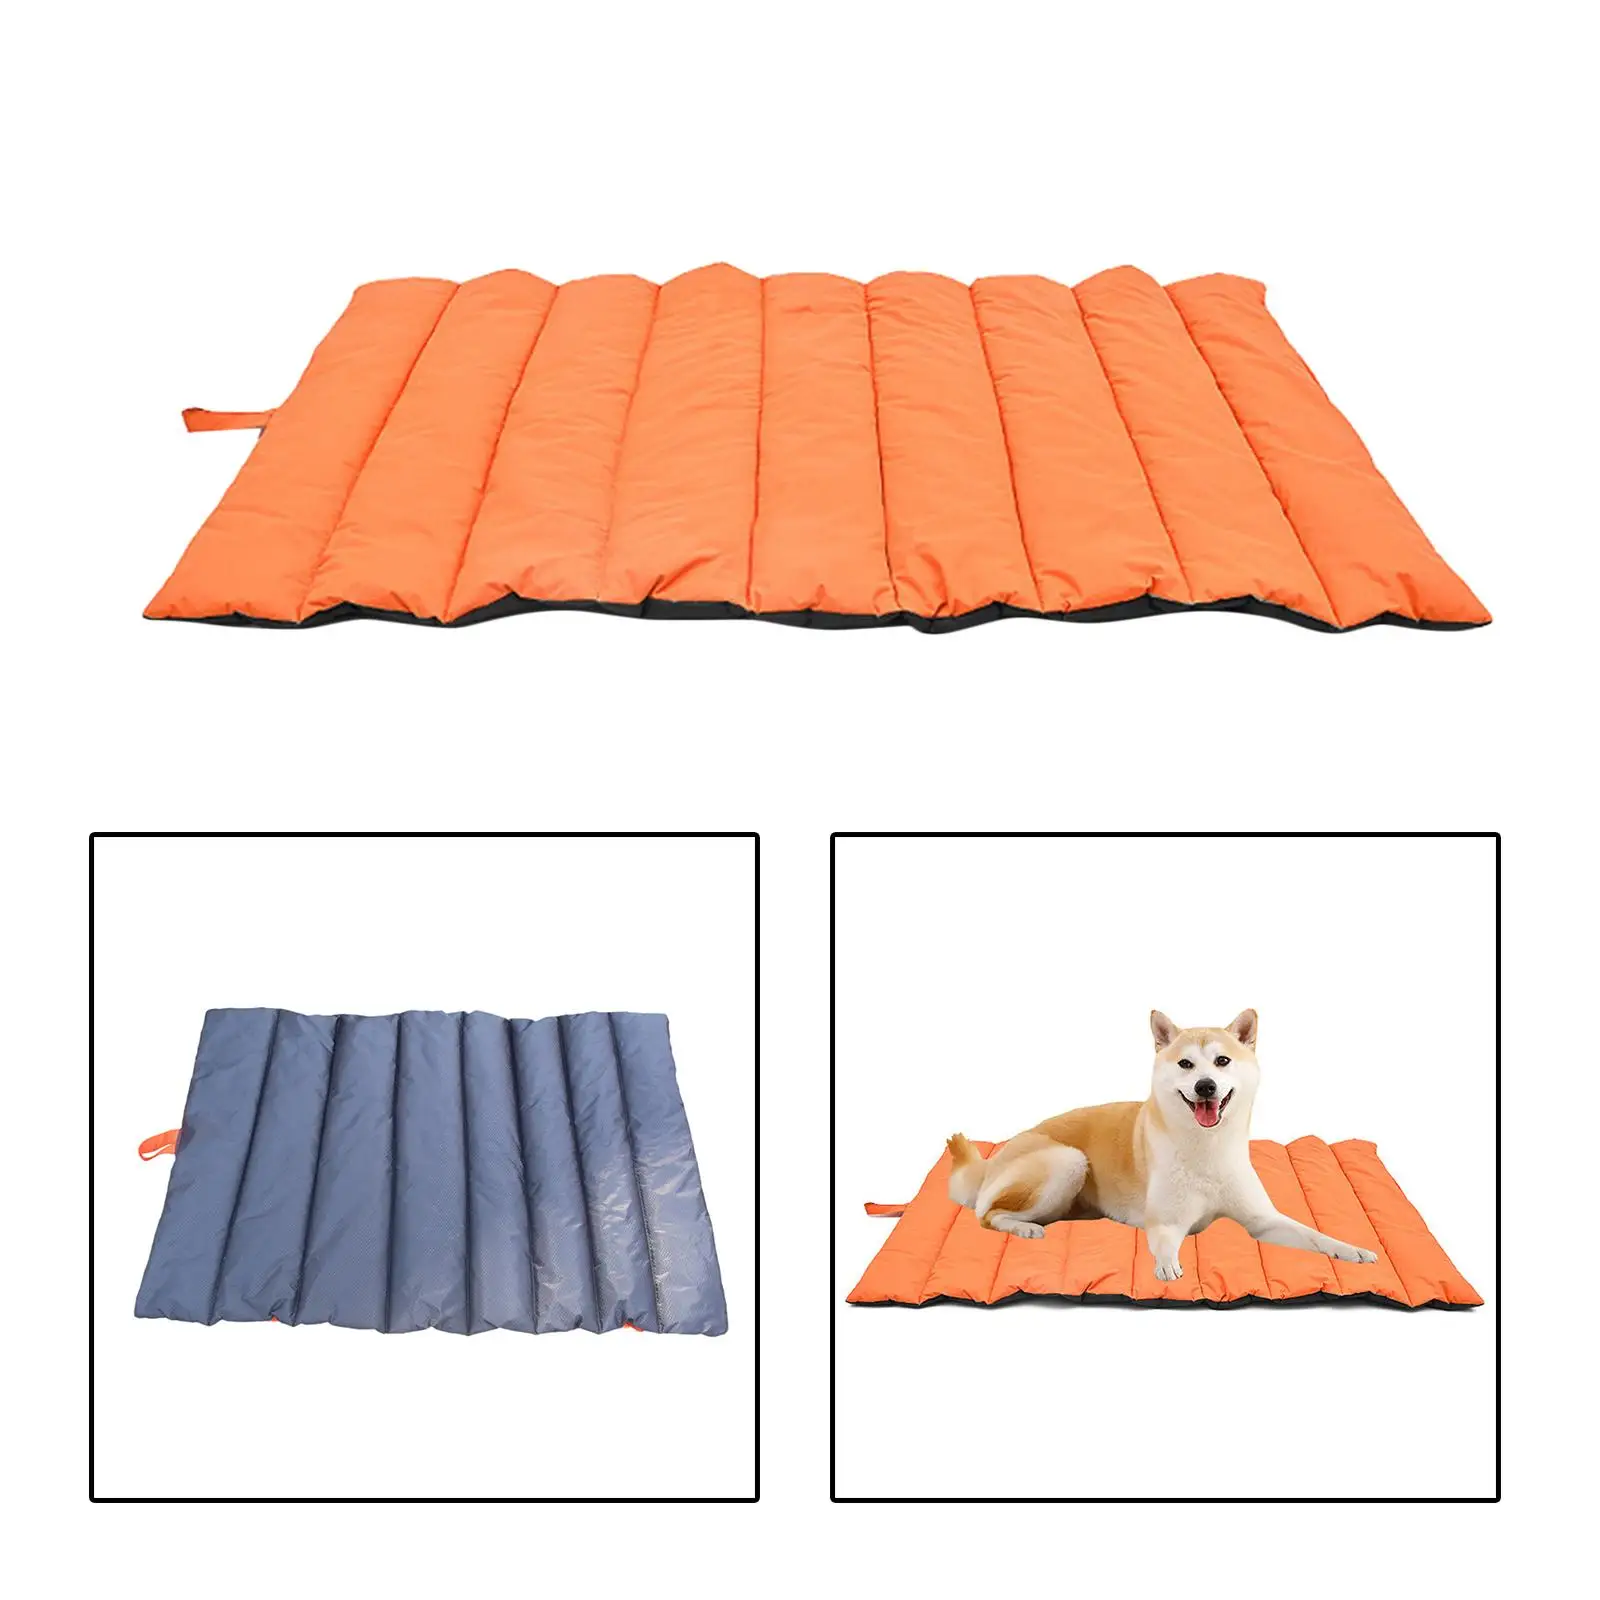 Indoor Outdoor Dog Crate Mat Breathable Sleeping Pad Pet Bed Mattress Cushion Blanket Dog Bed for Puppy Kitten Dogs Cats